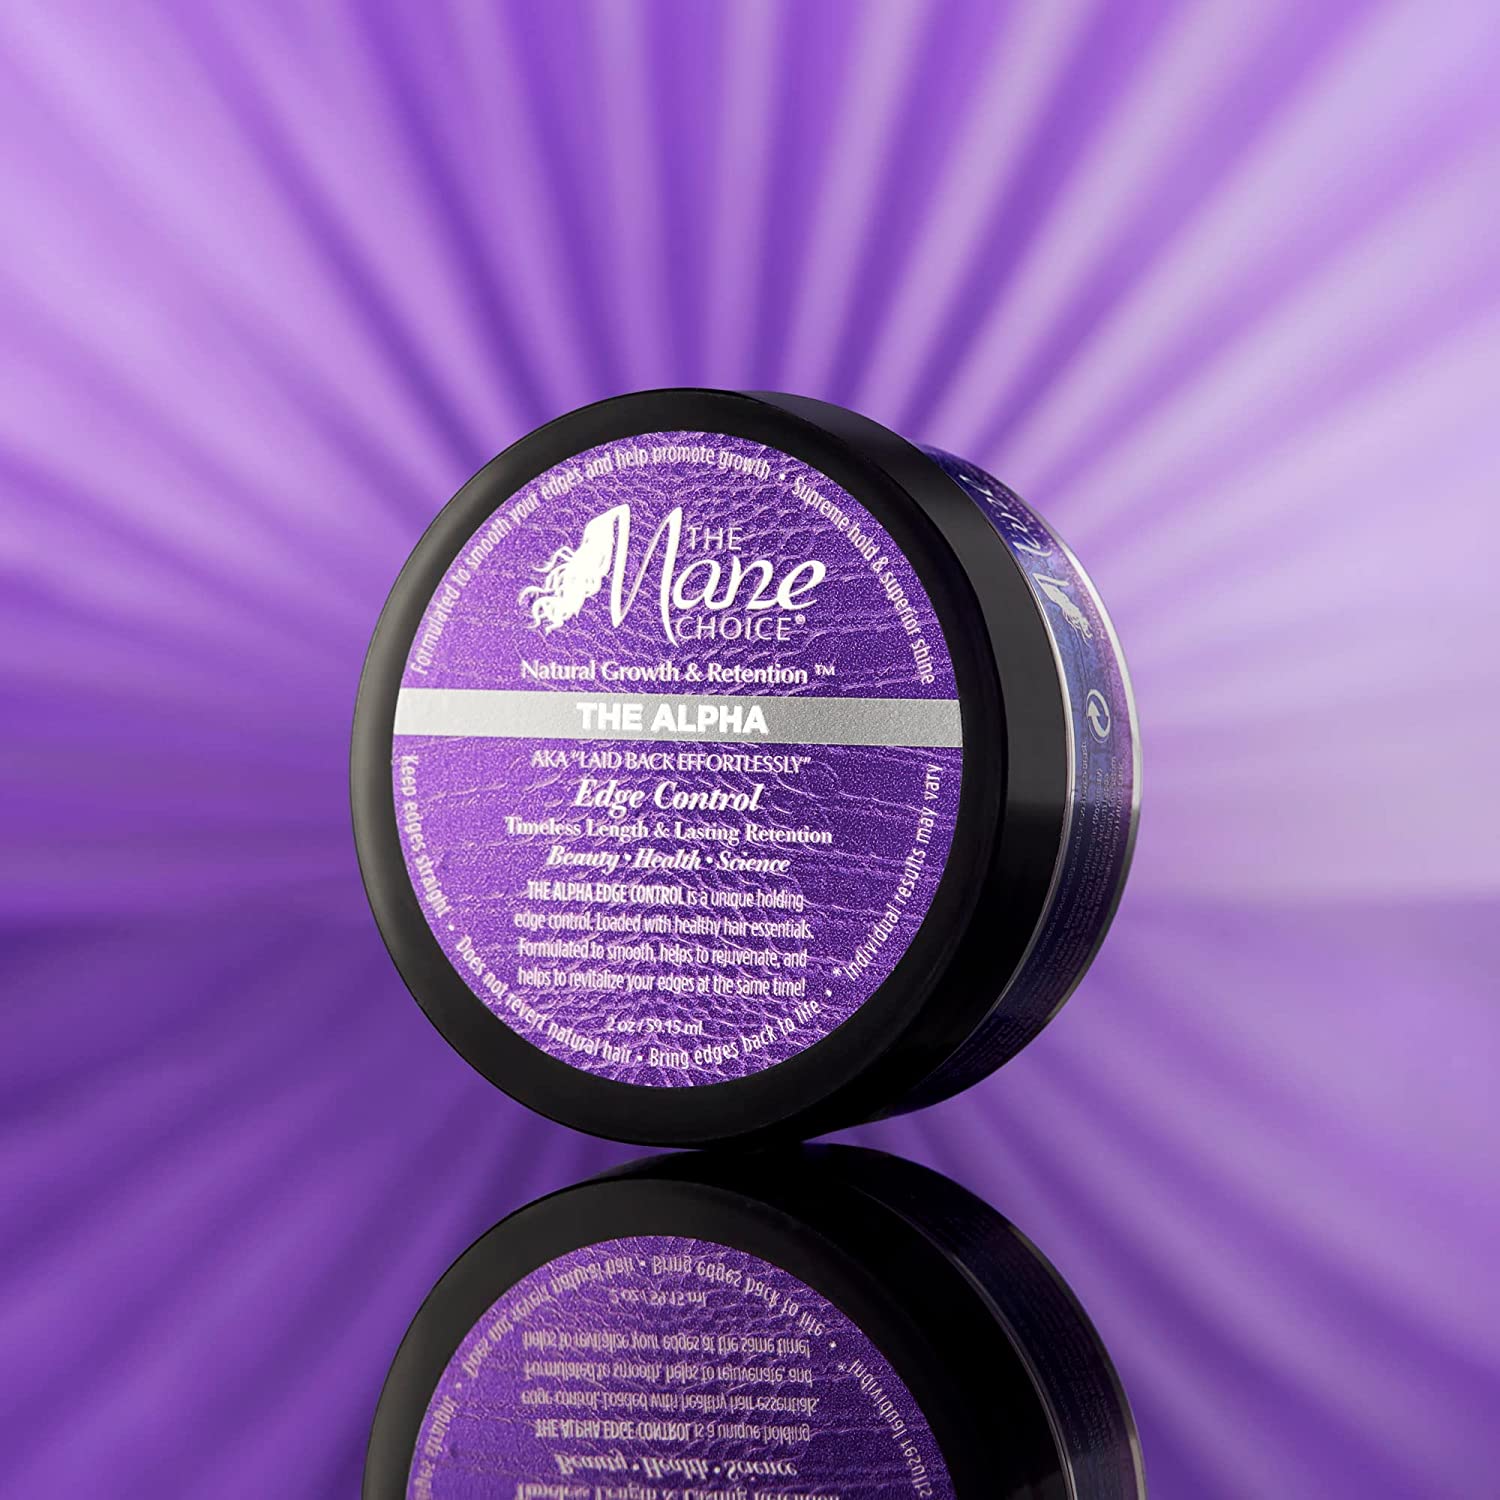 THE MANE CHOICE Laid Back Effortlessly Growth Stimulating Edge Control Find Your New Look Today!